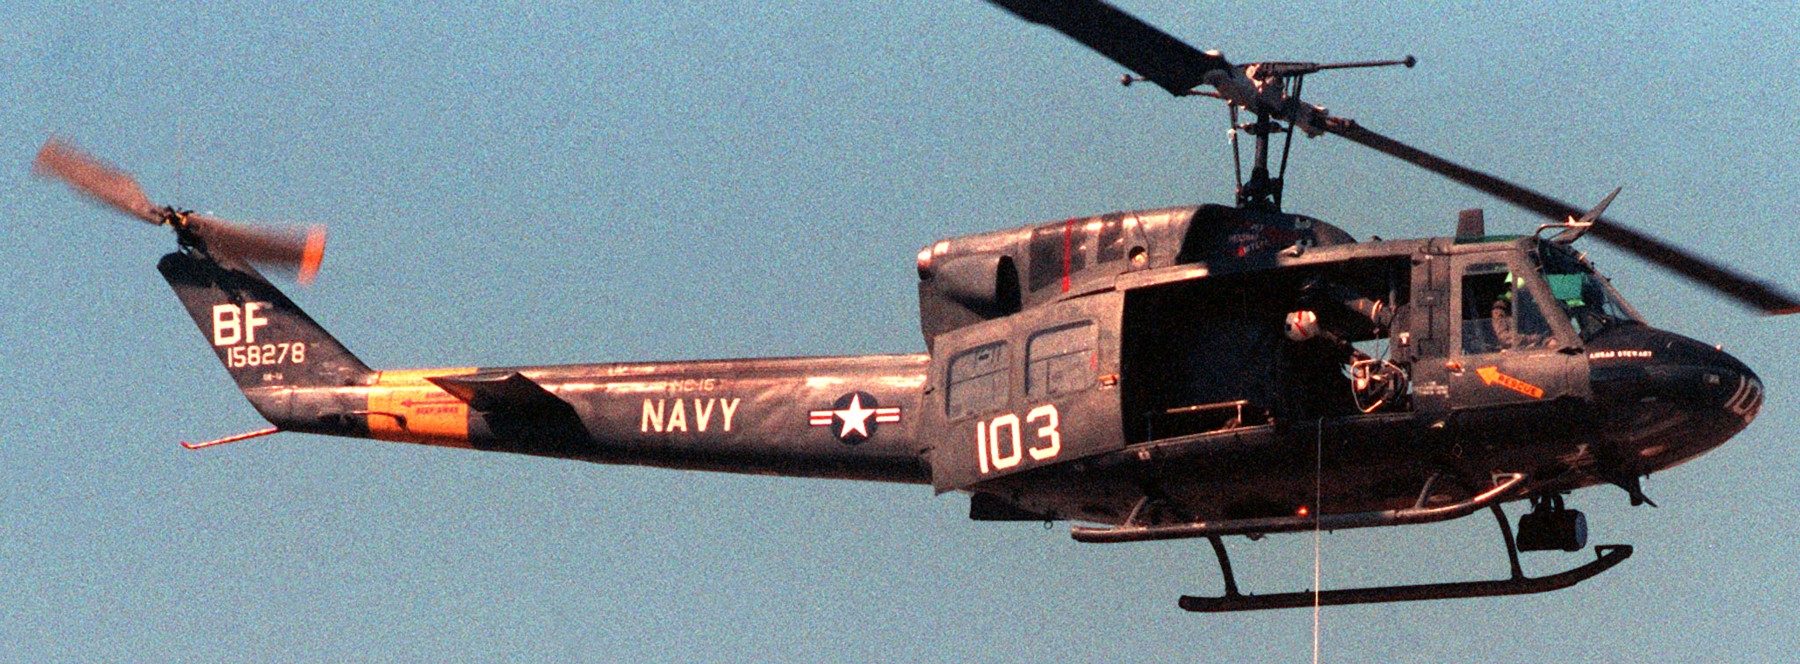 hc-16 bullfrogs helicopter combat support squadron navy uh-1n iroquois 11